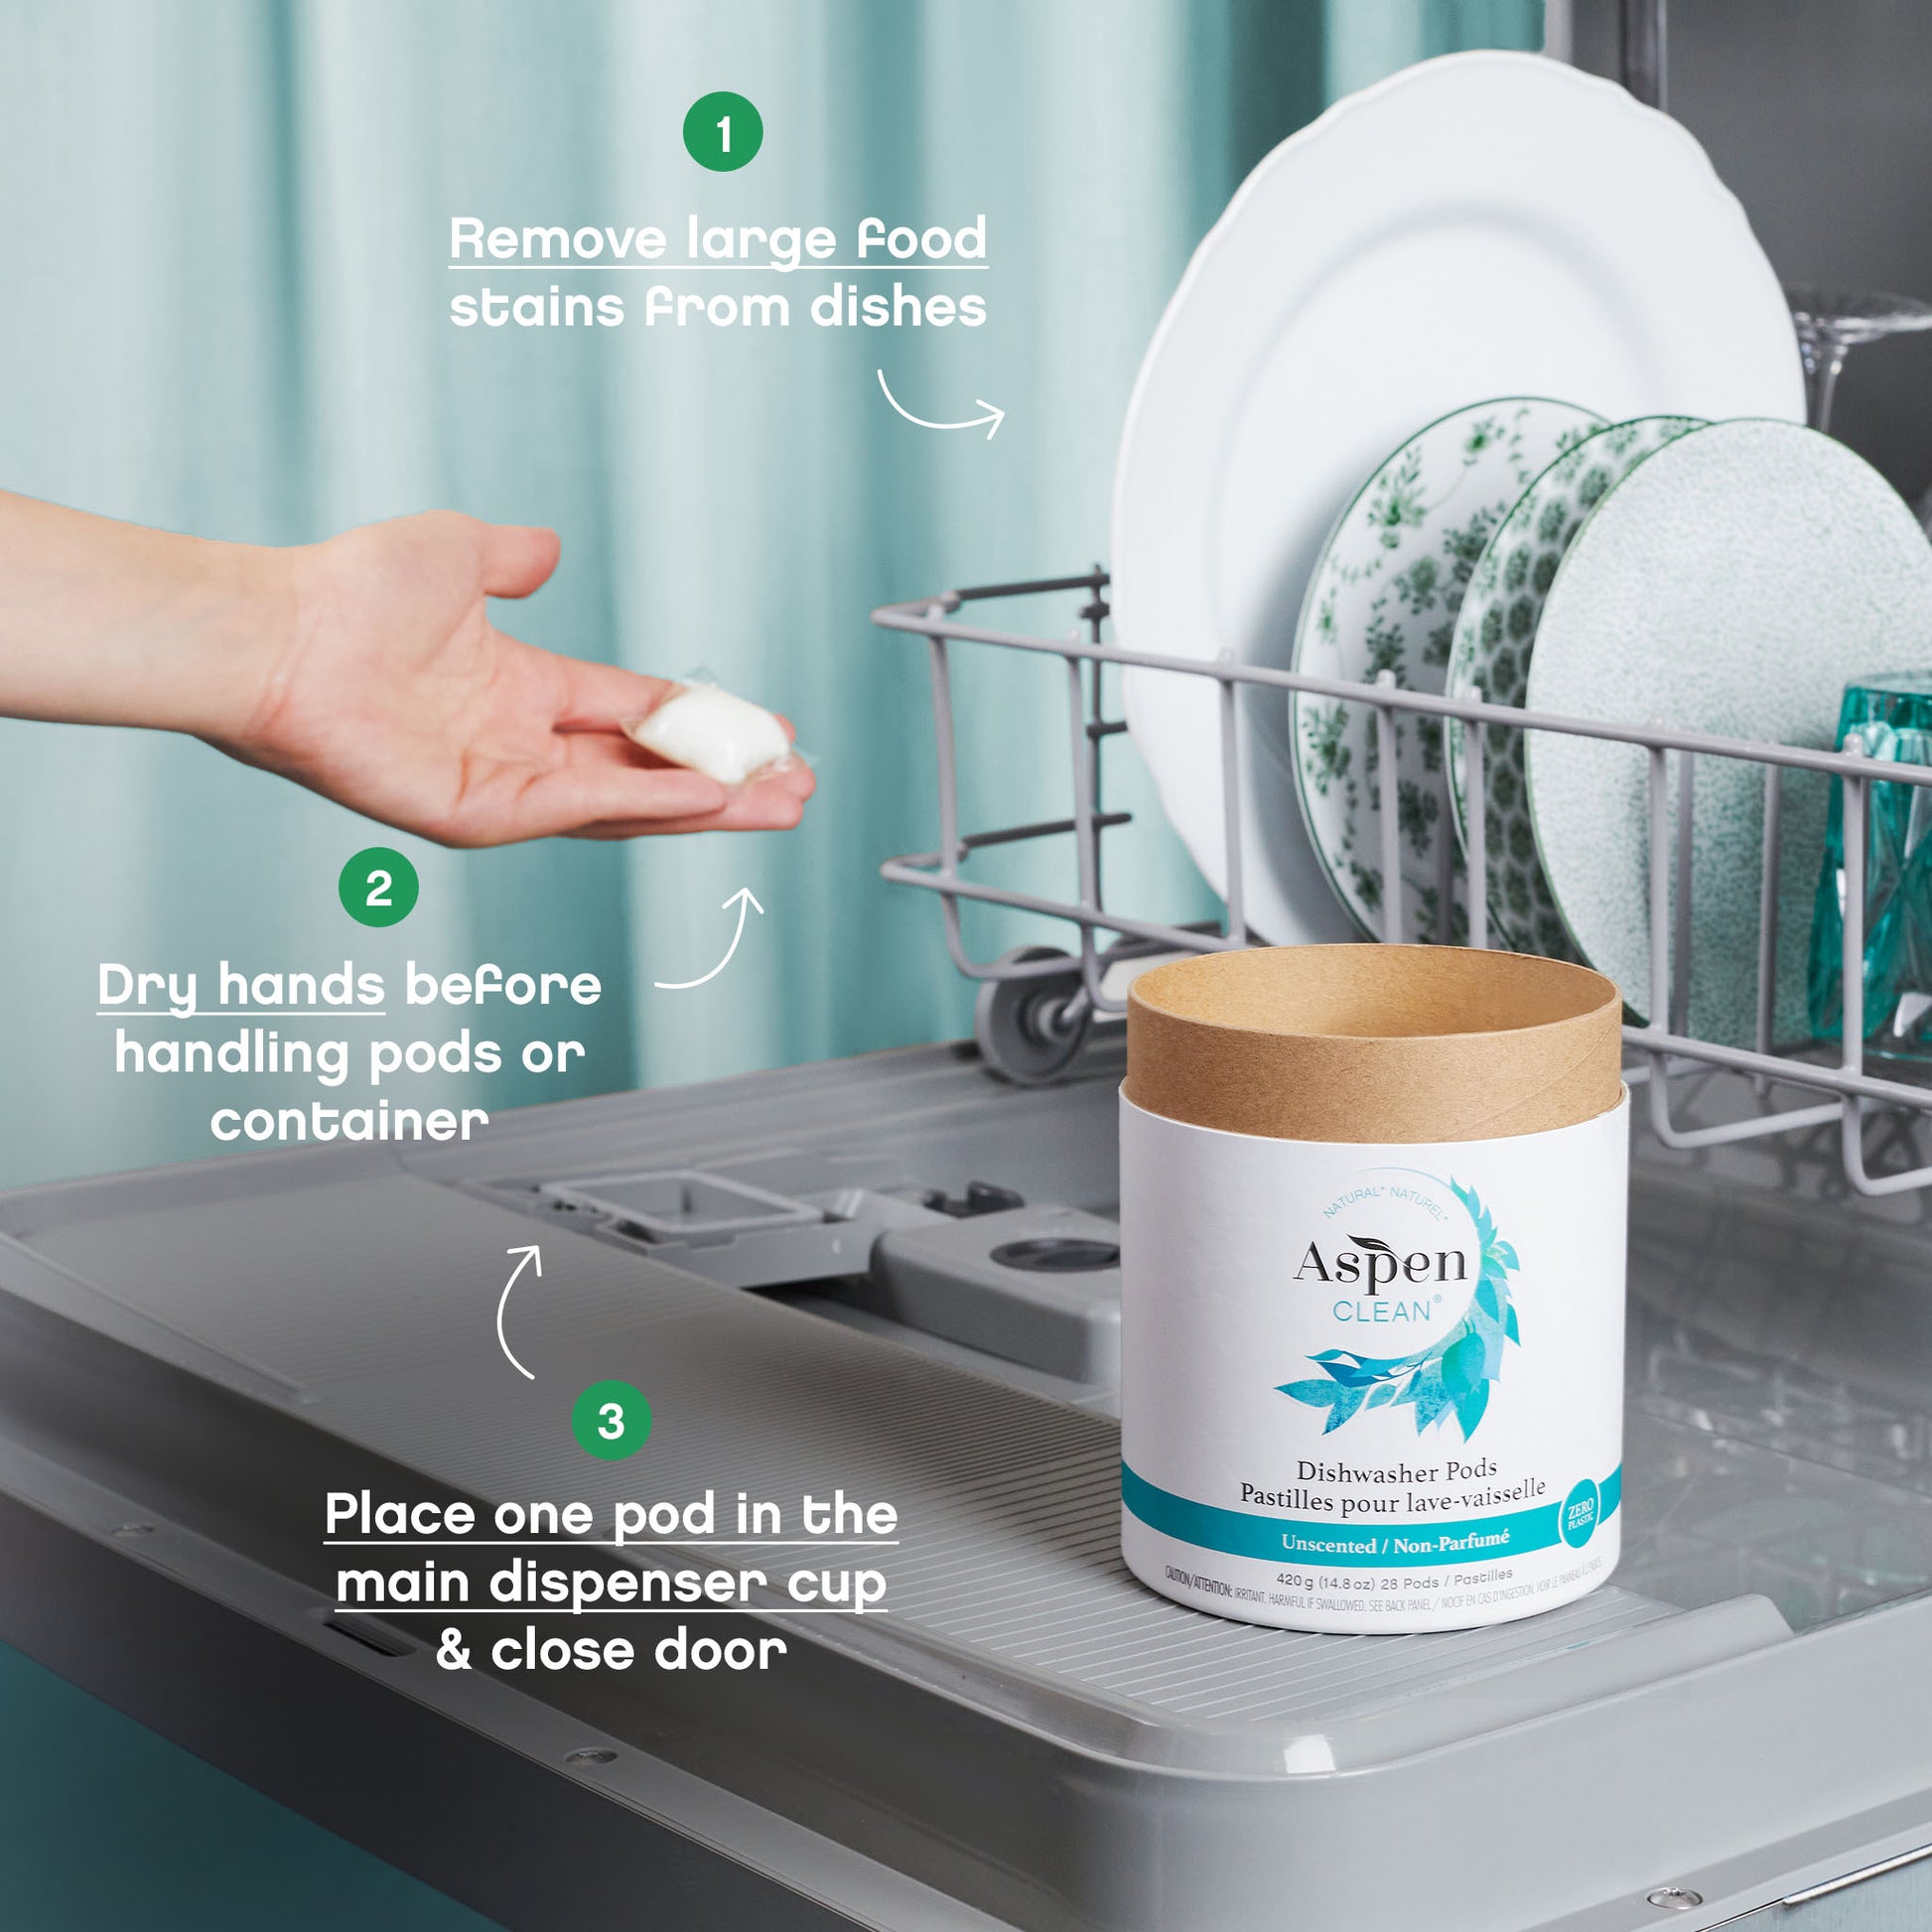 Eco- friendly Dishwasher Pods, Septic safe, Unscented, How to use dishwasher pods, AspenClean